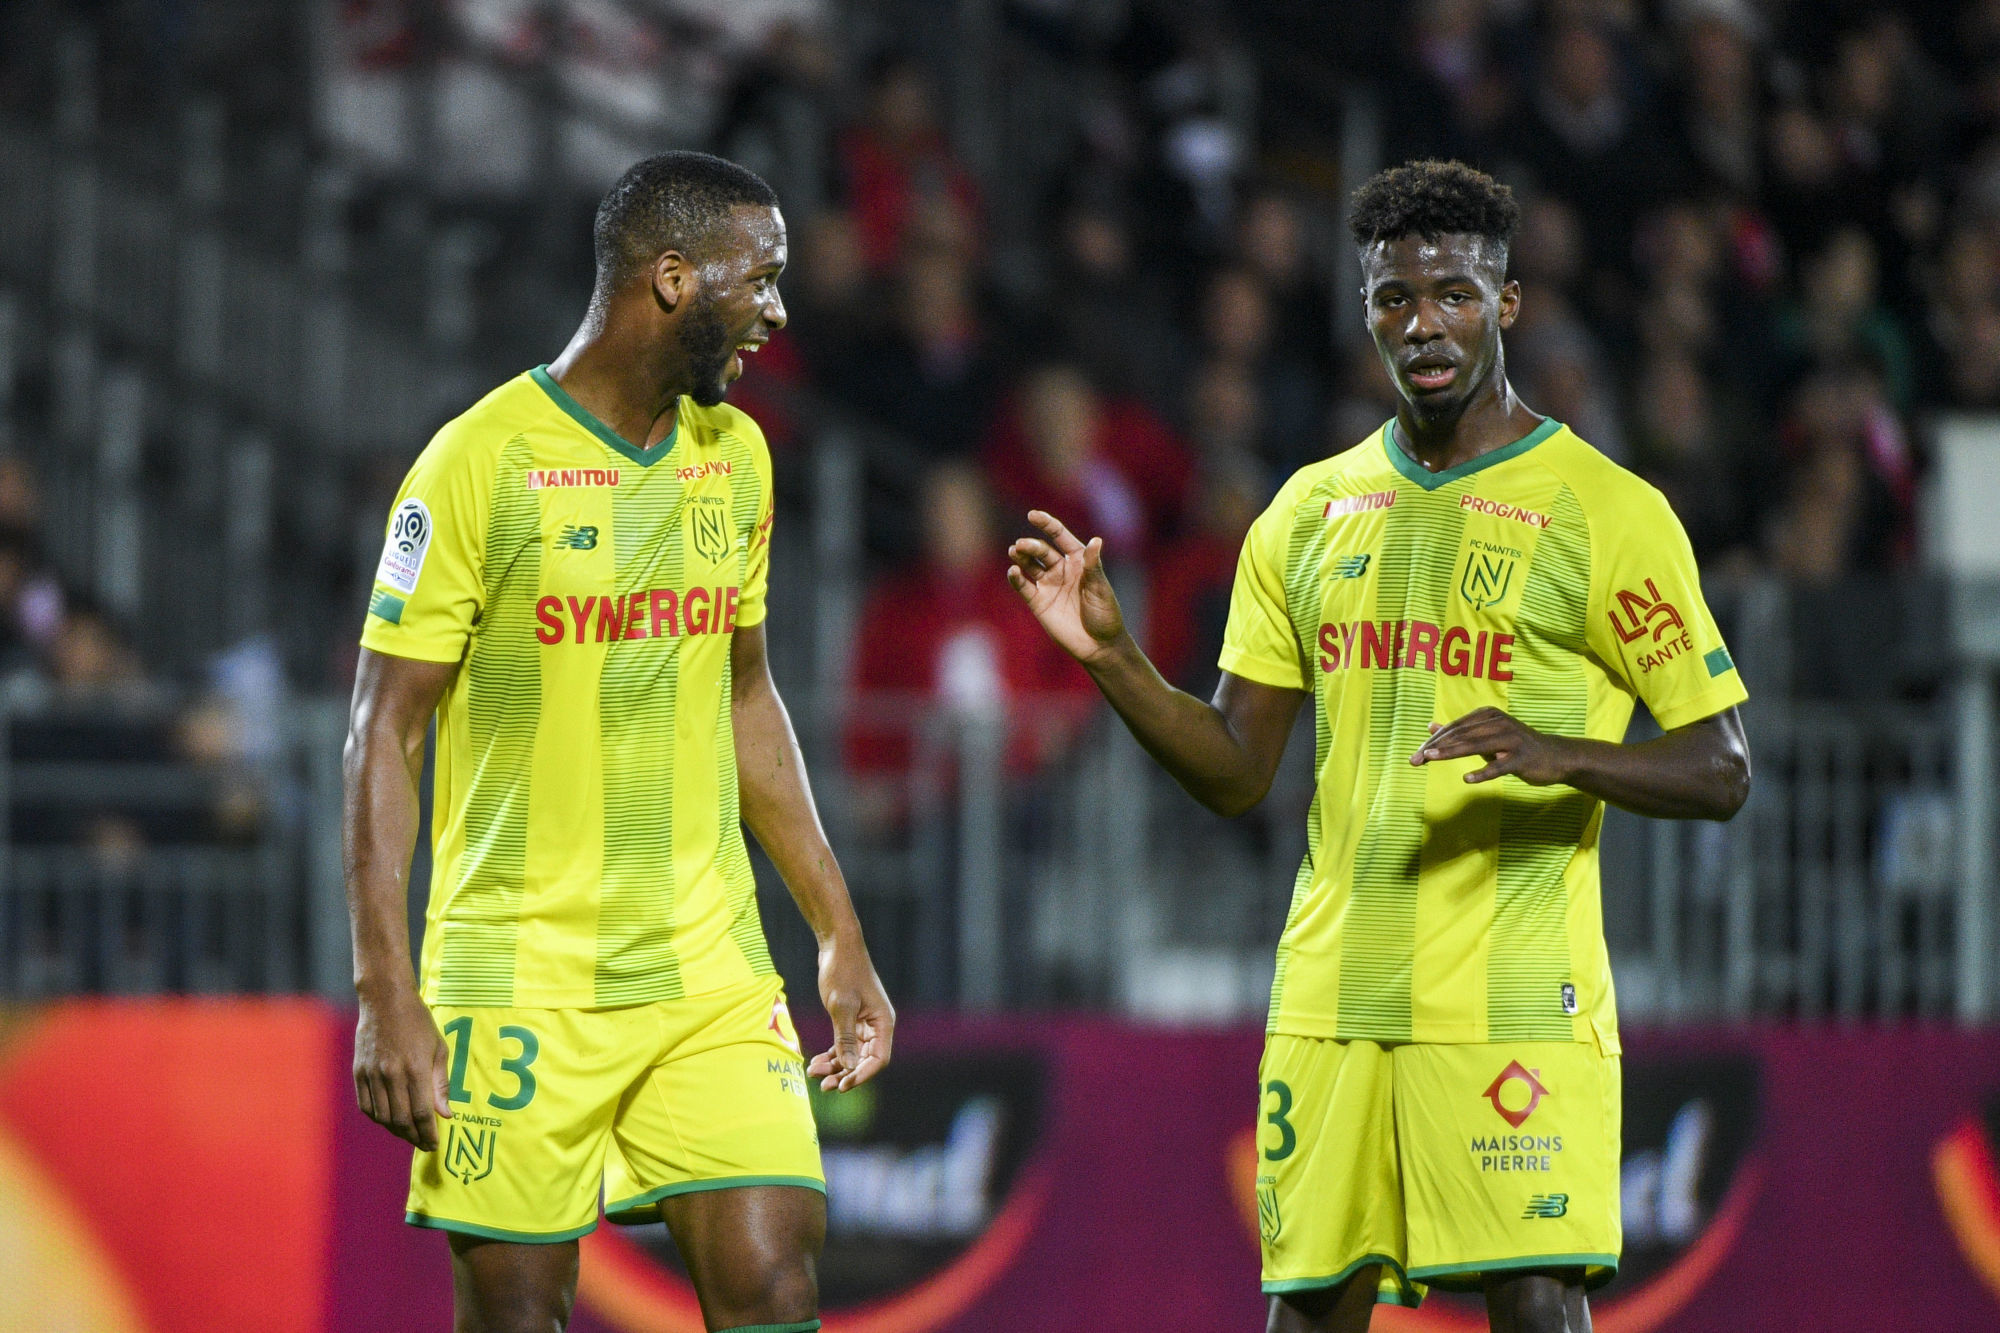 Molla WAGUE and Thomas BASILA of Nantes during the Ligue 1 match between Stade Brestois 29 and FC Nantes on November 23, 2019 in Brest, France. (Photo by Aude Alcover/Icon Sport) - Molla WAGUE - Thomas BASILA - Stade Francis-Le-Blé - Brest (France)